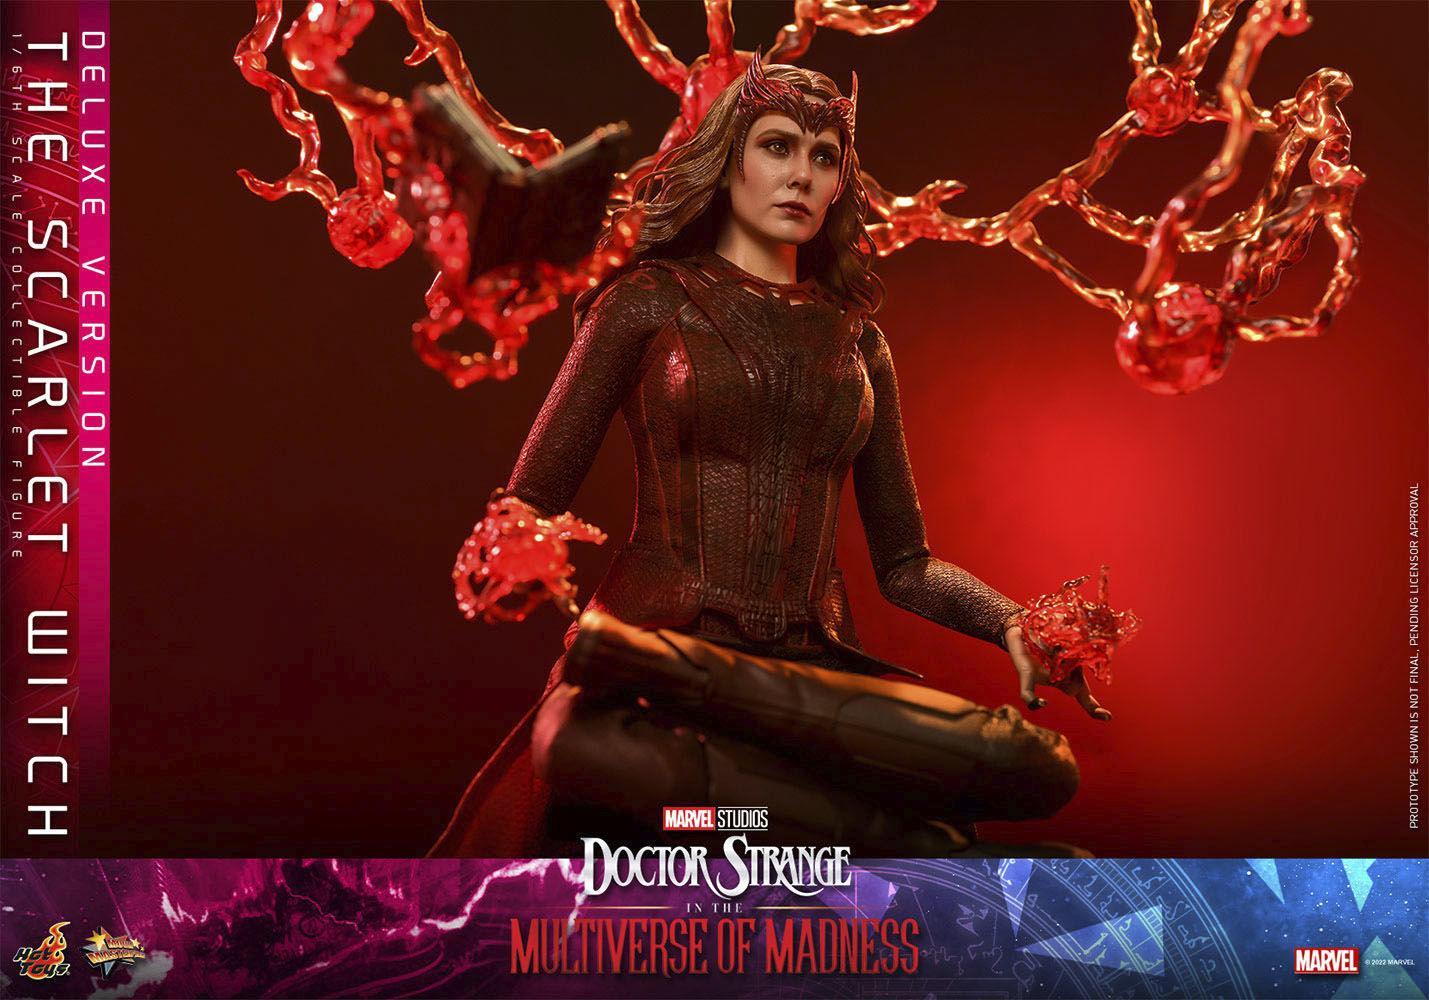 HOTMMS653 Doctor Strange 2: Multiverse of Madness - Scarlet Witch Deluxe 1:6 Scale Action Figure - Hot Toys - Titan Pop Culture